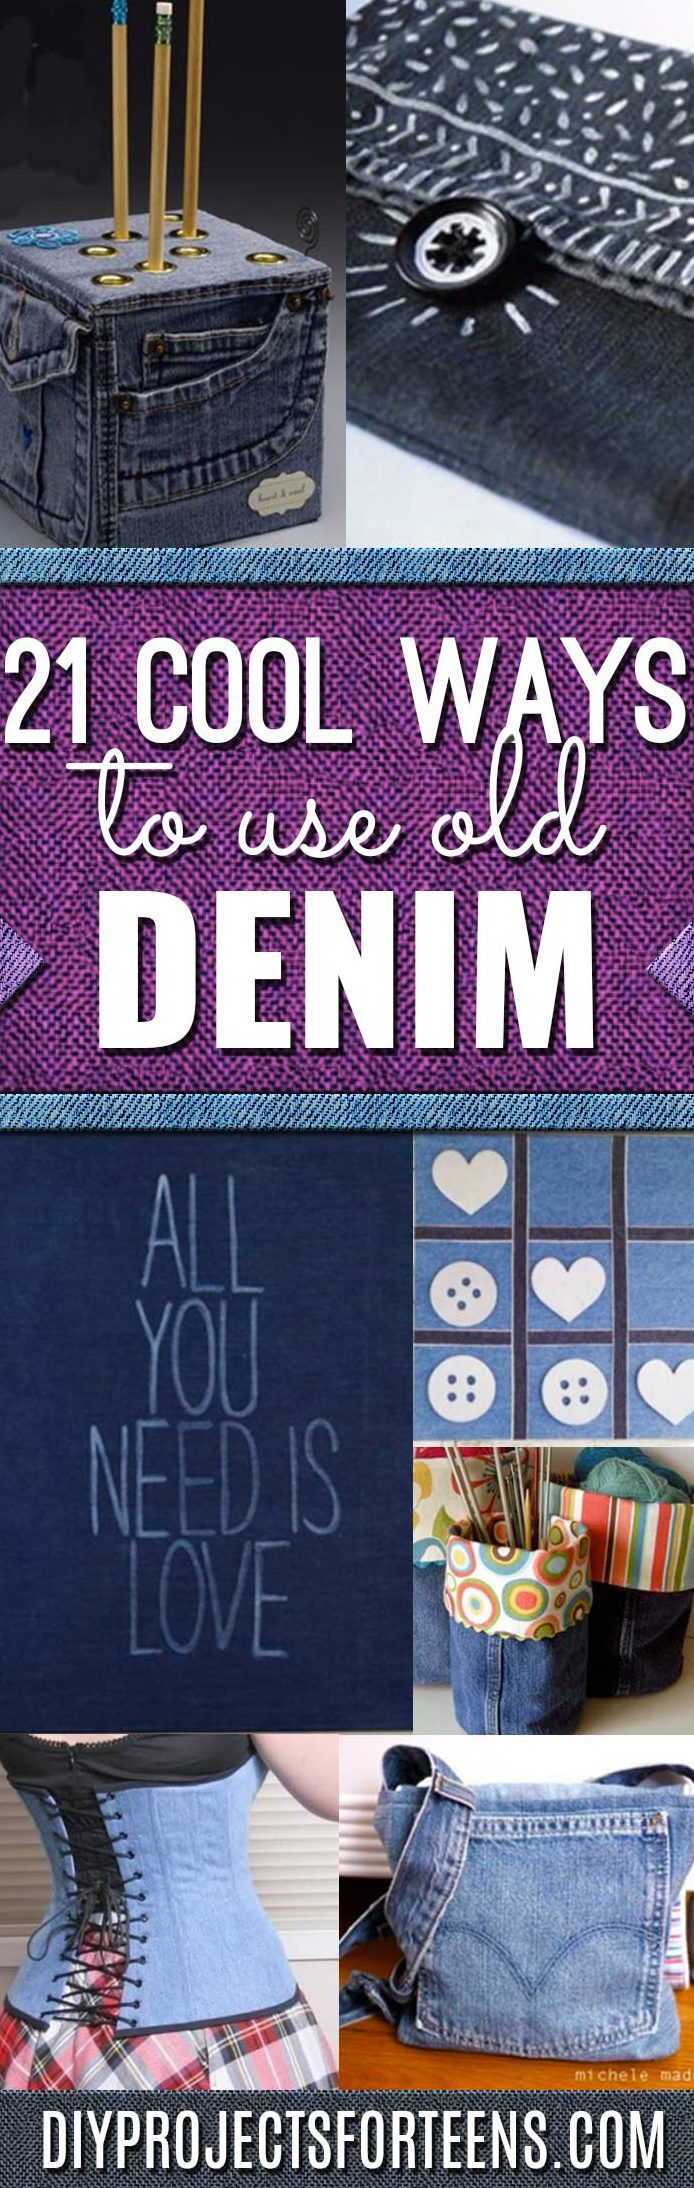 21 Awesome Ways To Use Old Denim Jeans